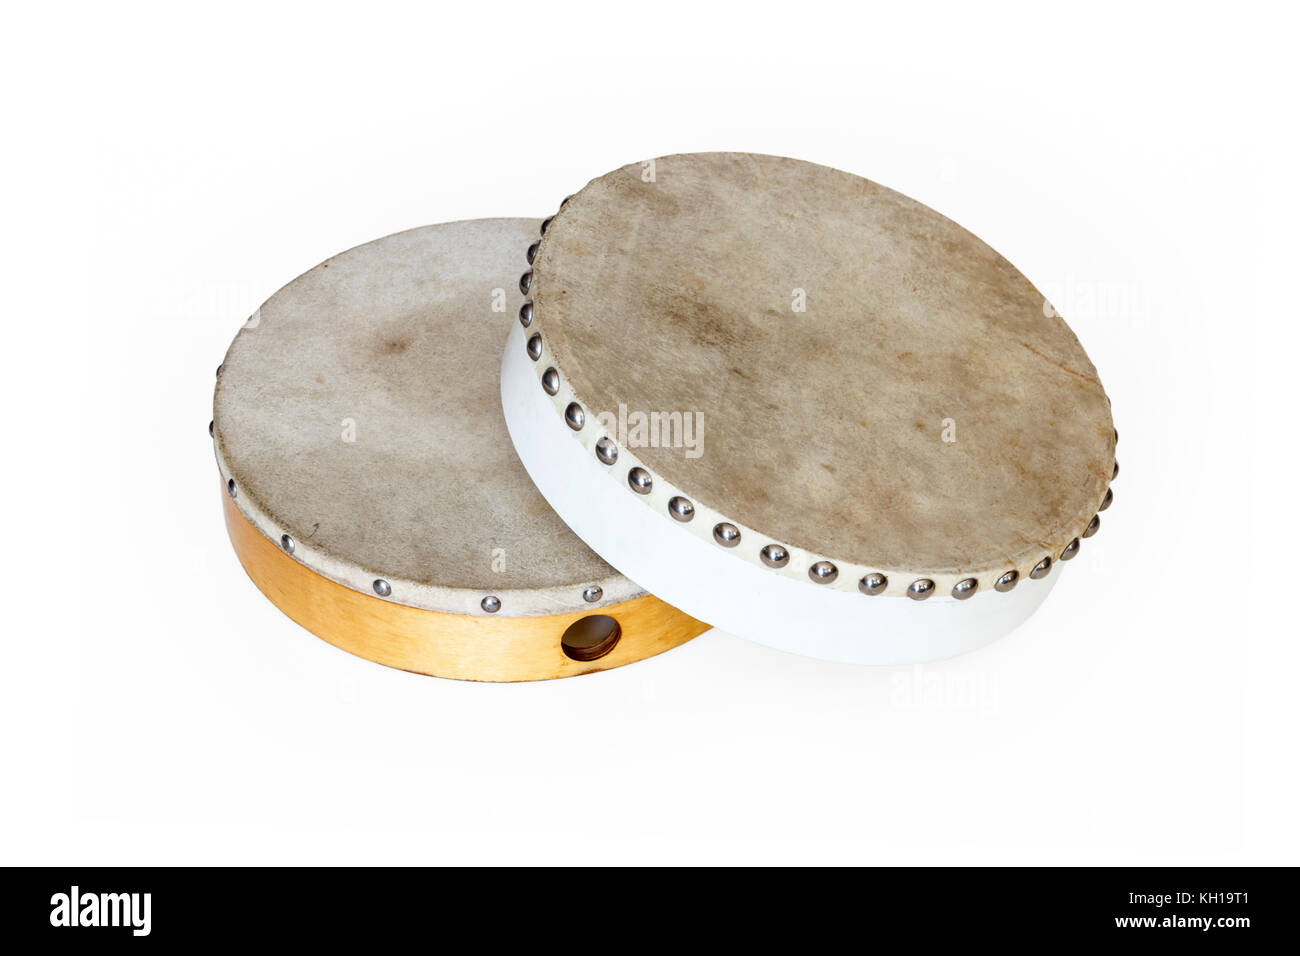 Two traditional tambour drums, one white one natural wood colour, against a white background Stock Photo